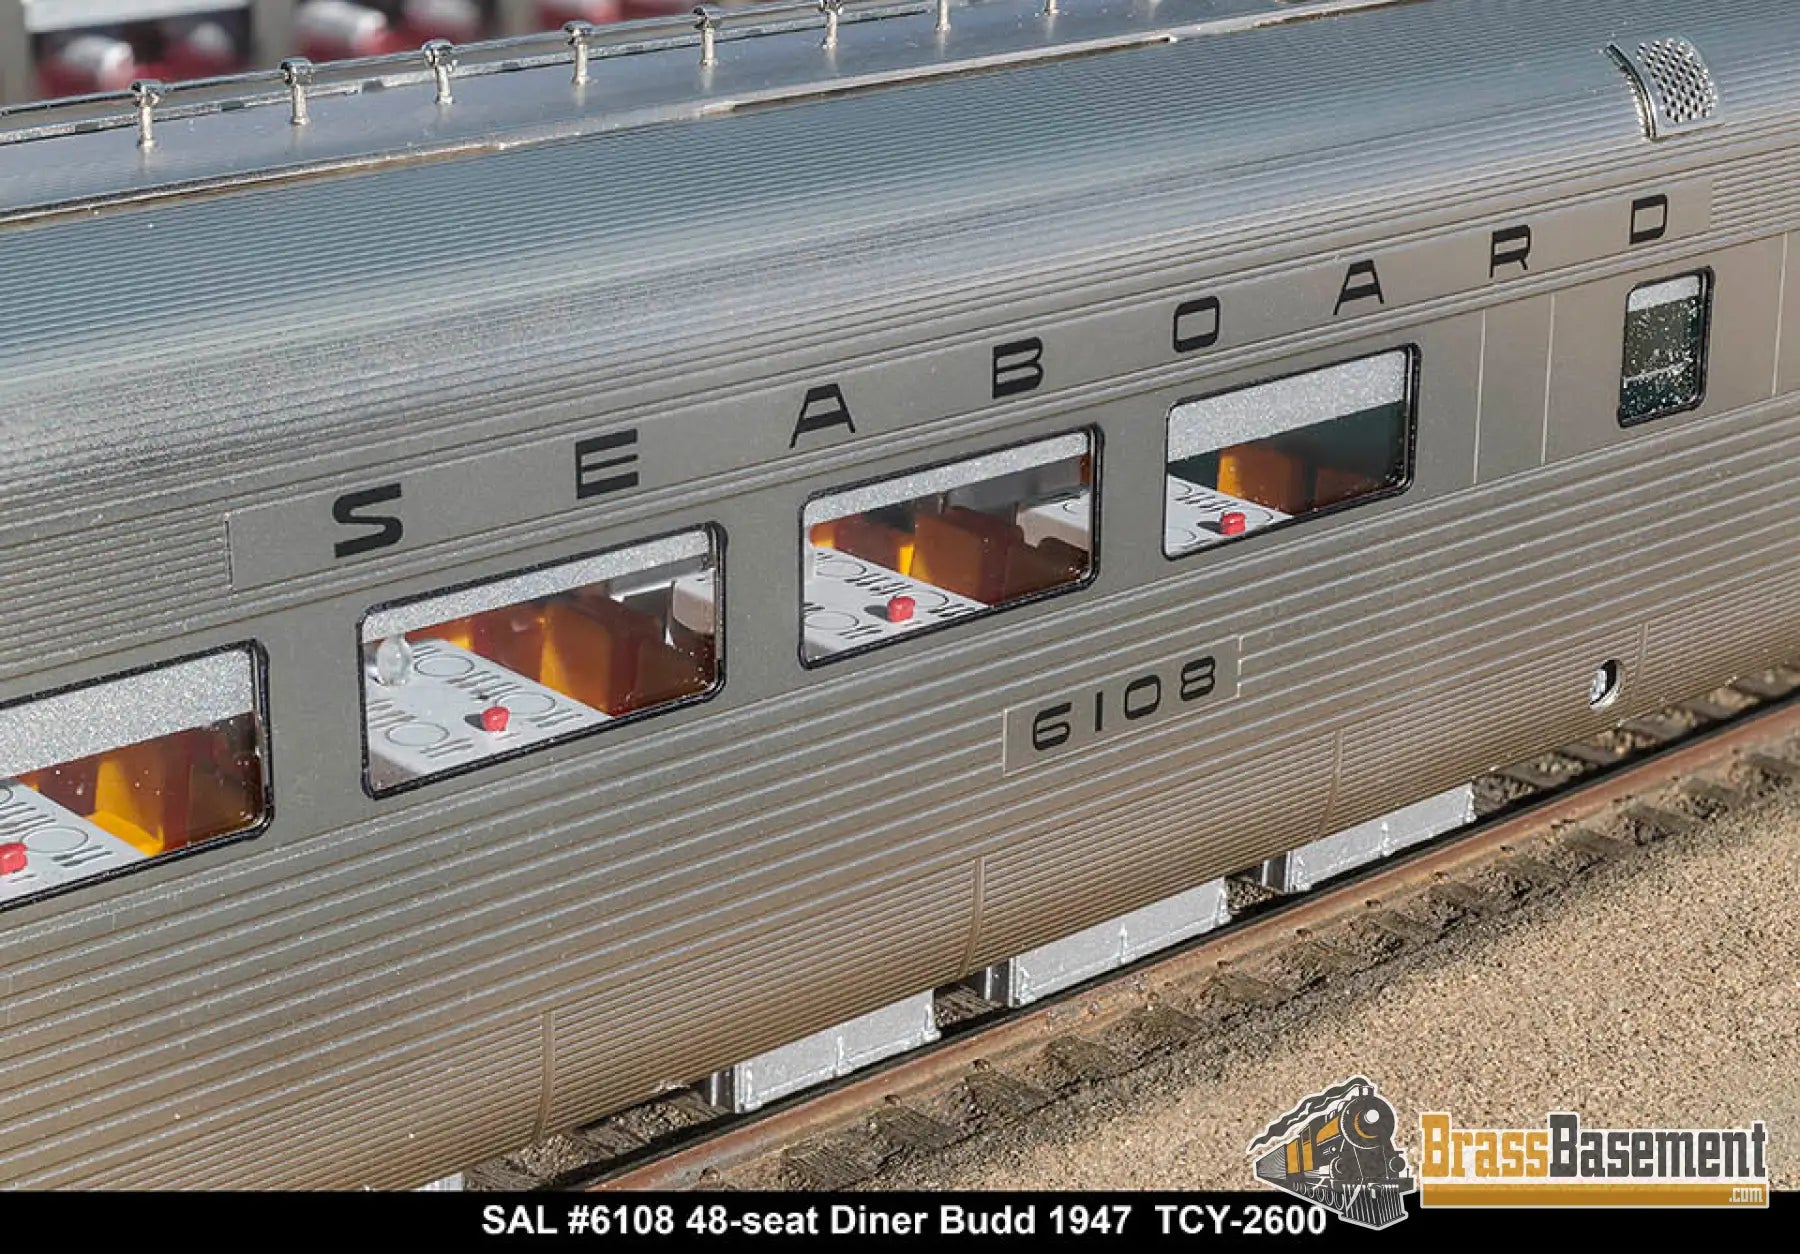 Ho Brass - Coach Yard 2600 The ’Silver Meteor’ Train Stainless Seaboard Rf&P Prr 7 Car Brand